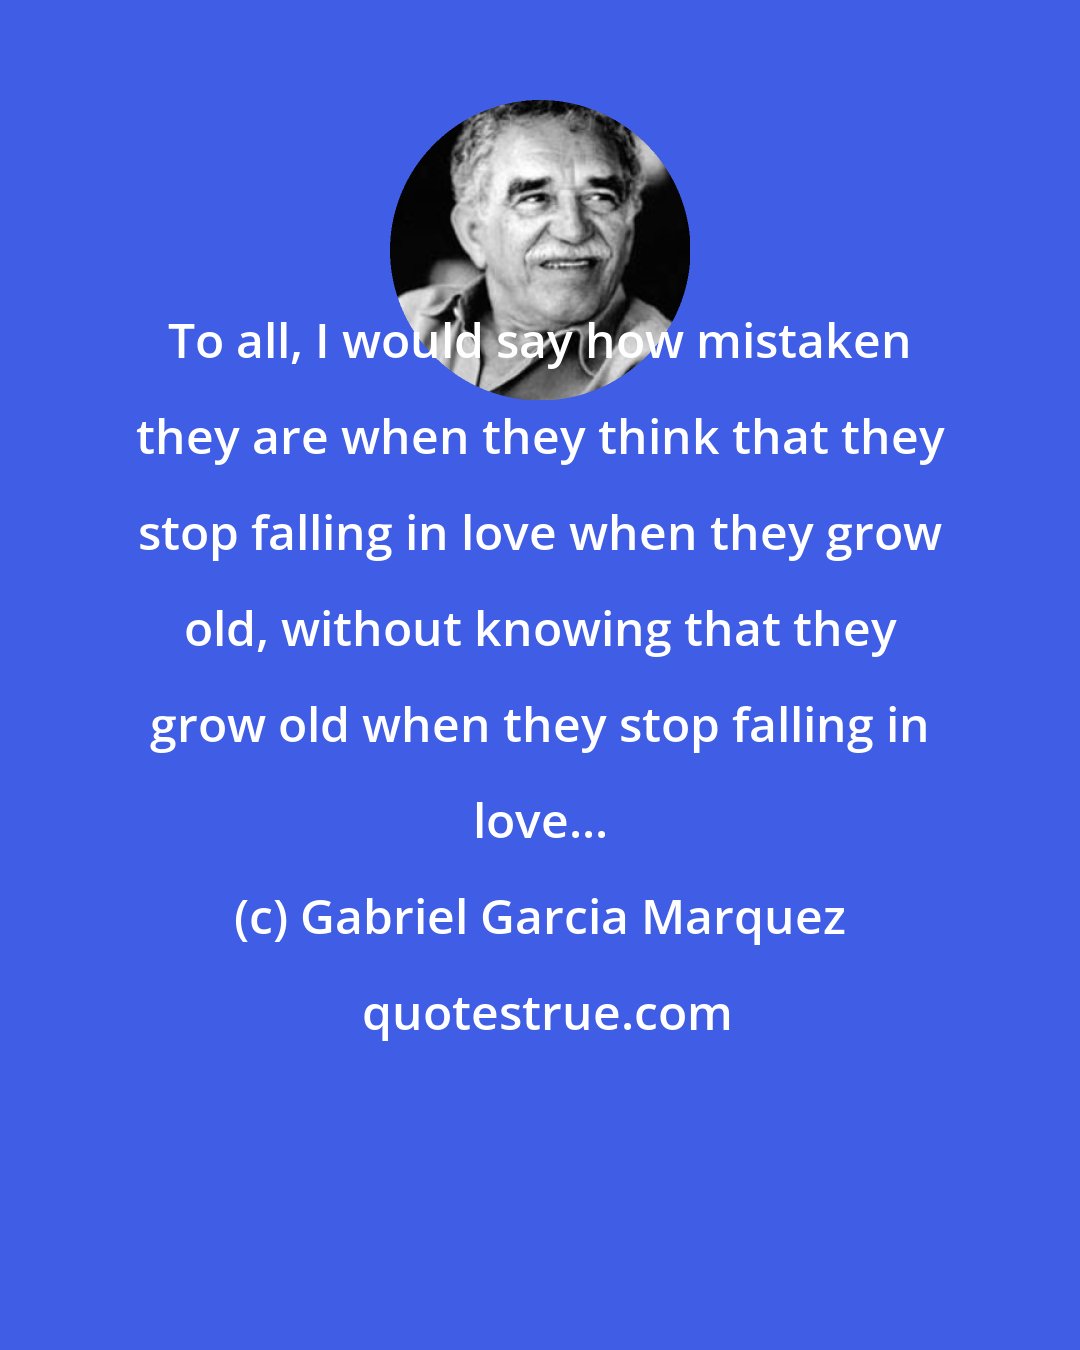 Gabriel Garcia Marquez: To all, I would say how mistaken they are when they think that they stop falling in love when they grow old, without knowing that they grow old when they stop falling in love...